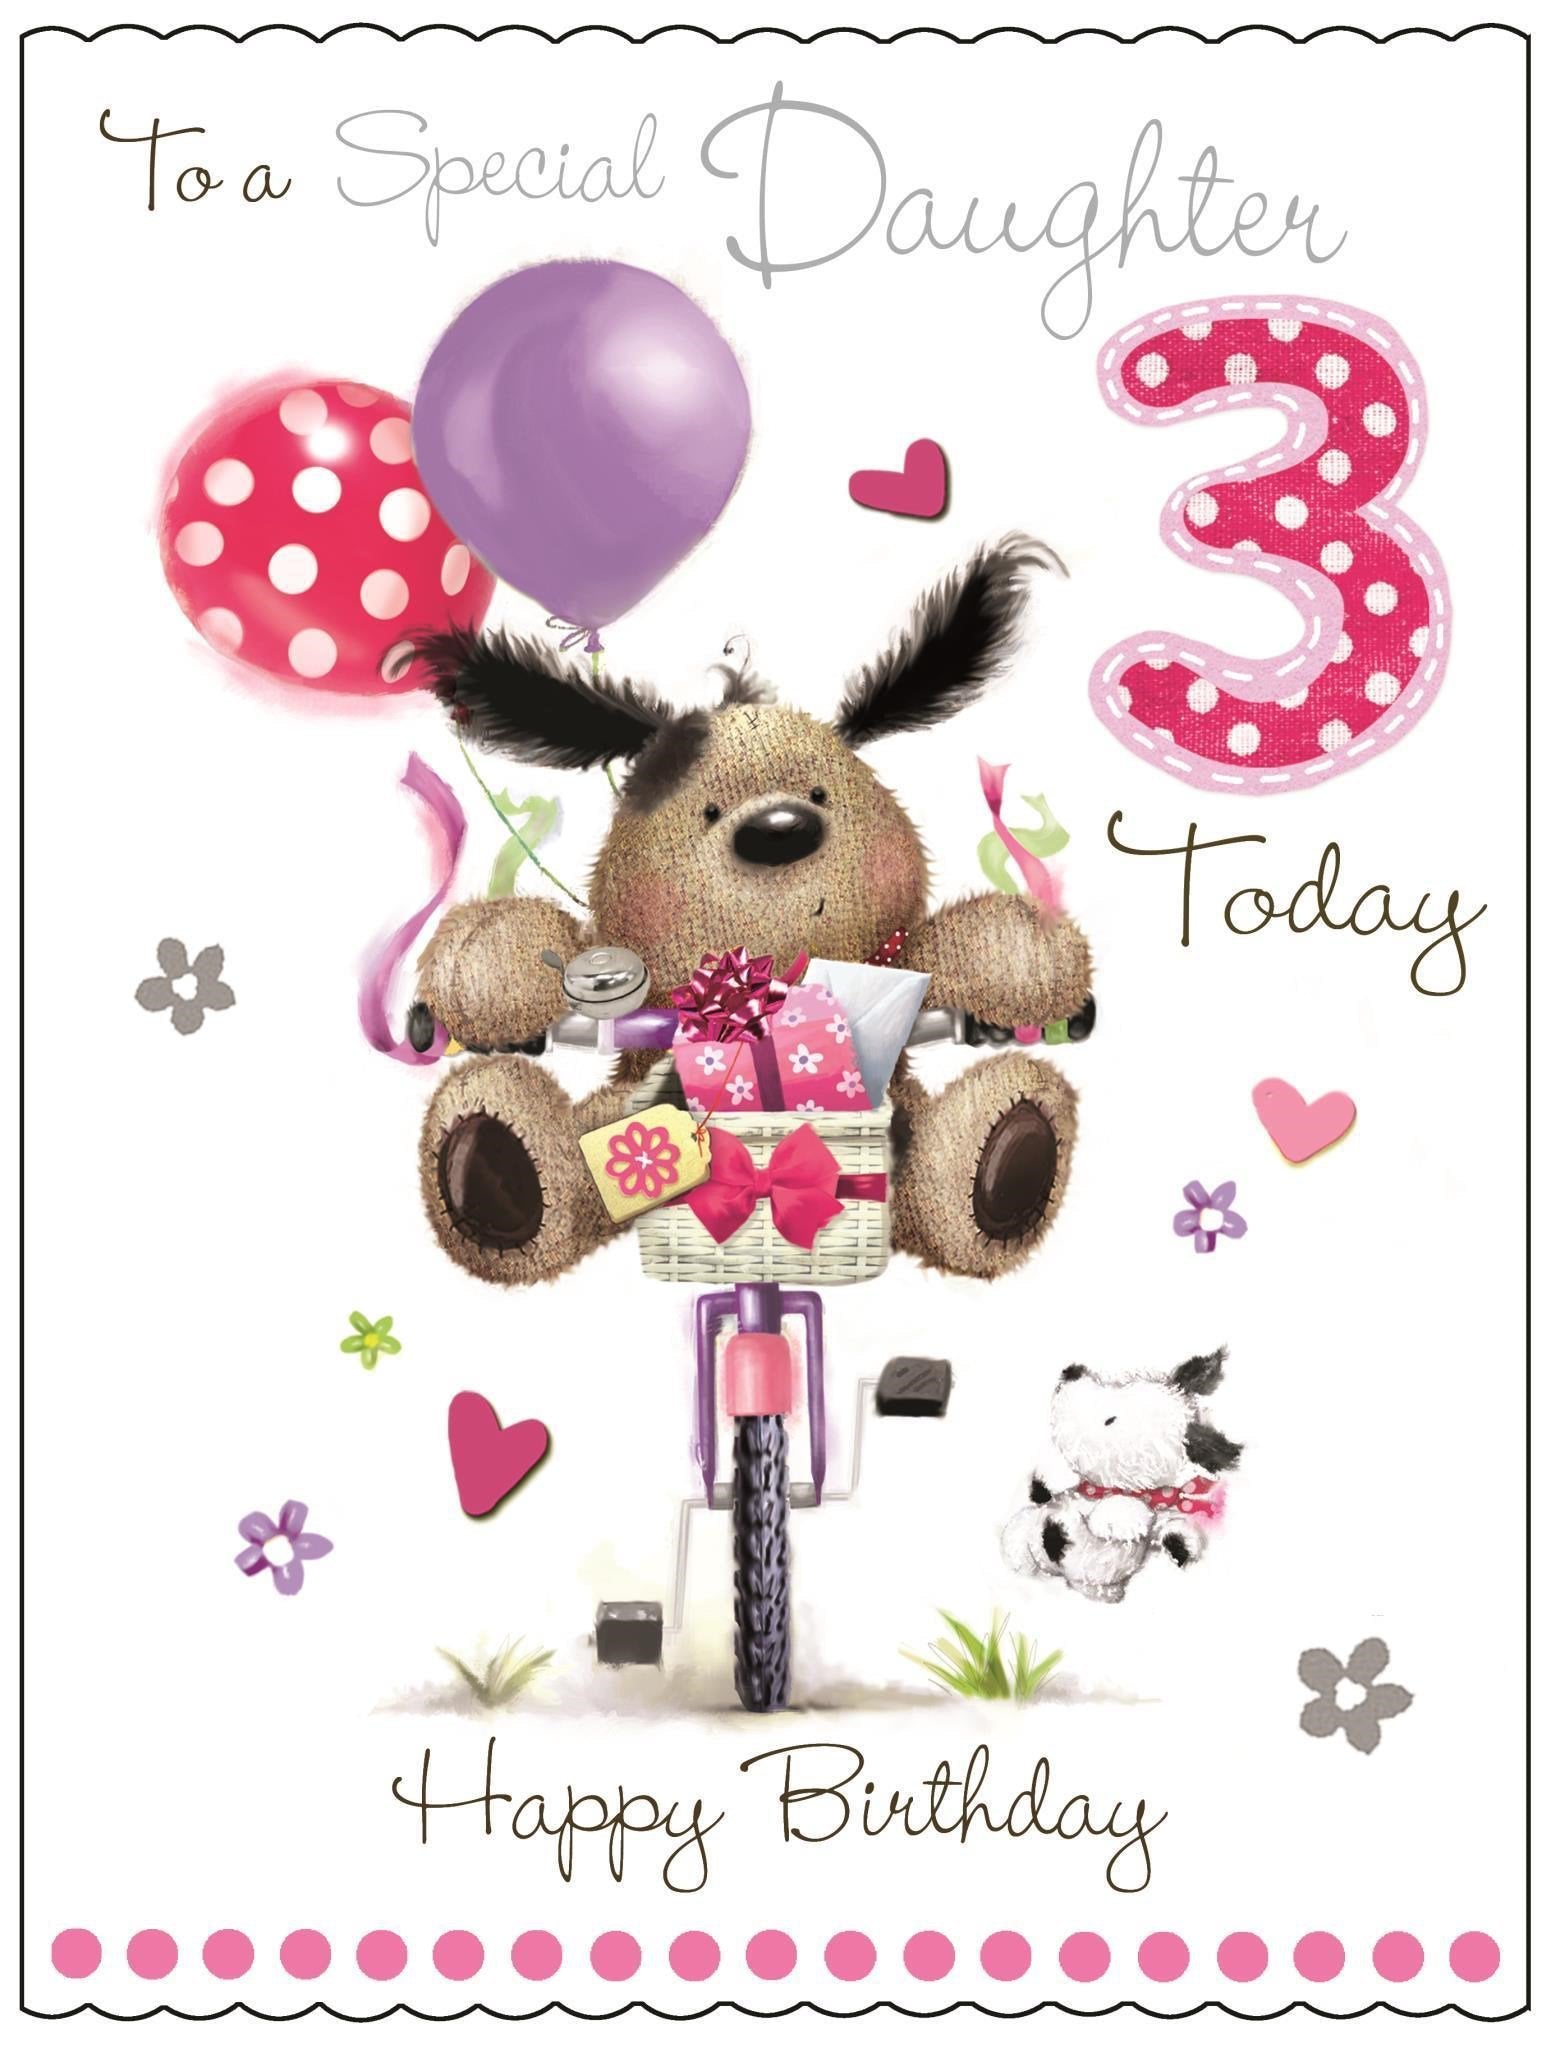 Front of Daughter 3rd Birthday Greetings Card